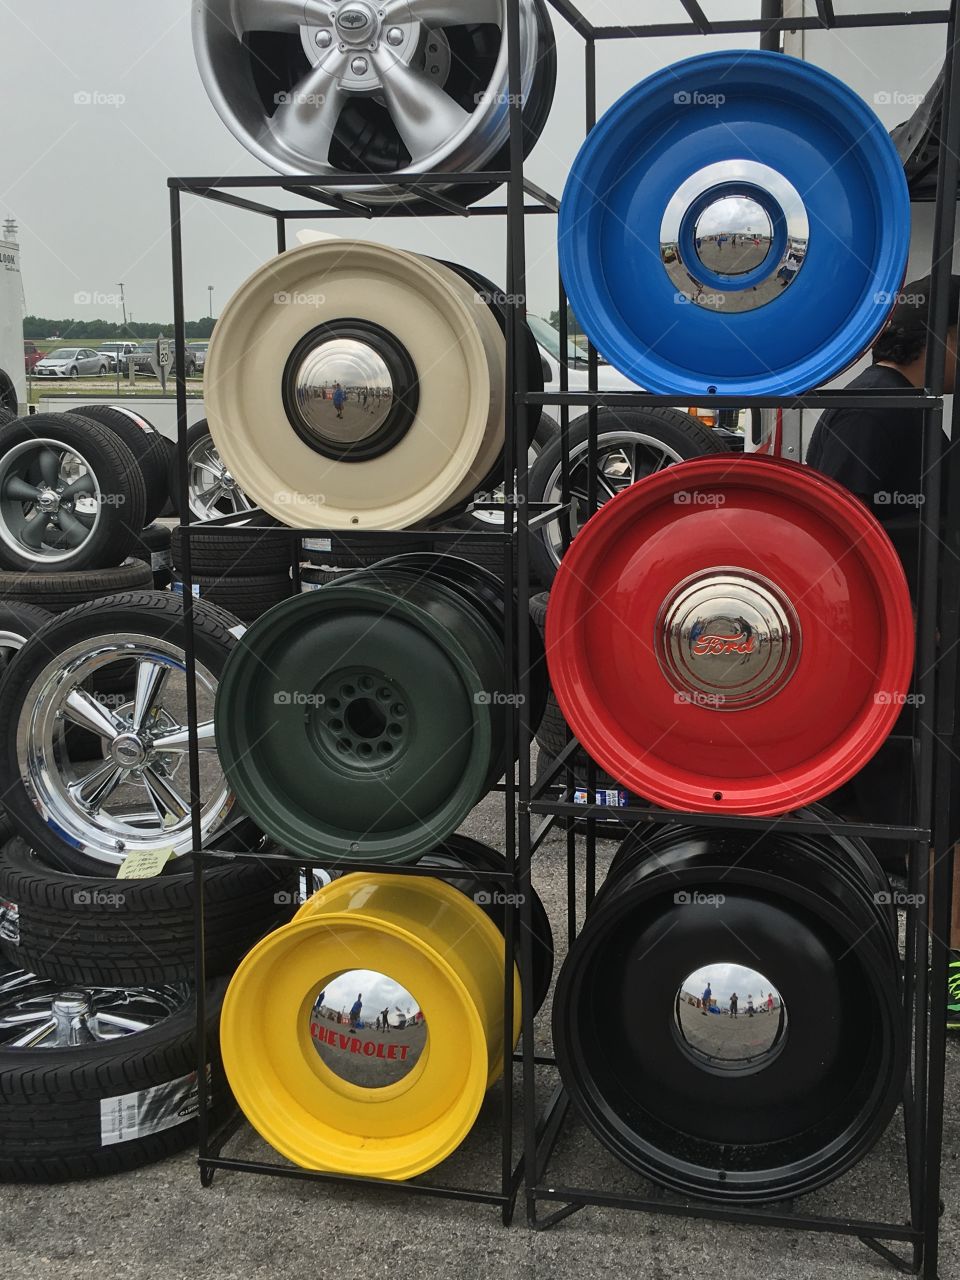 Rims of a different color